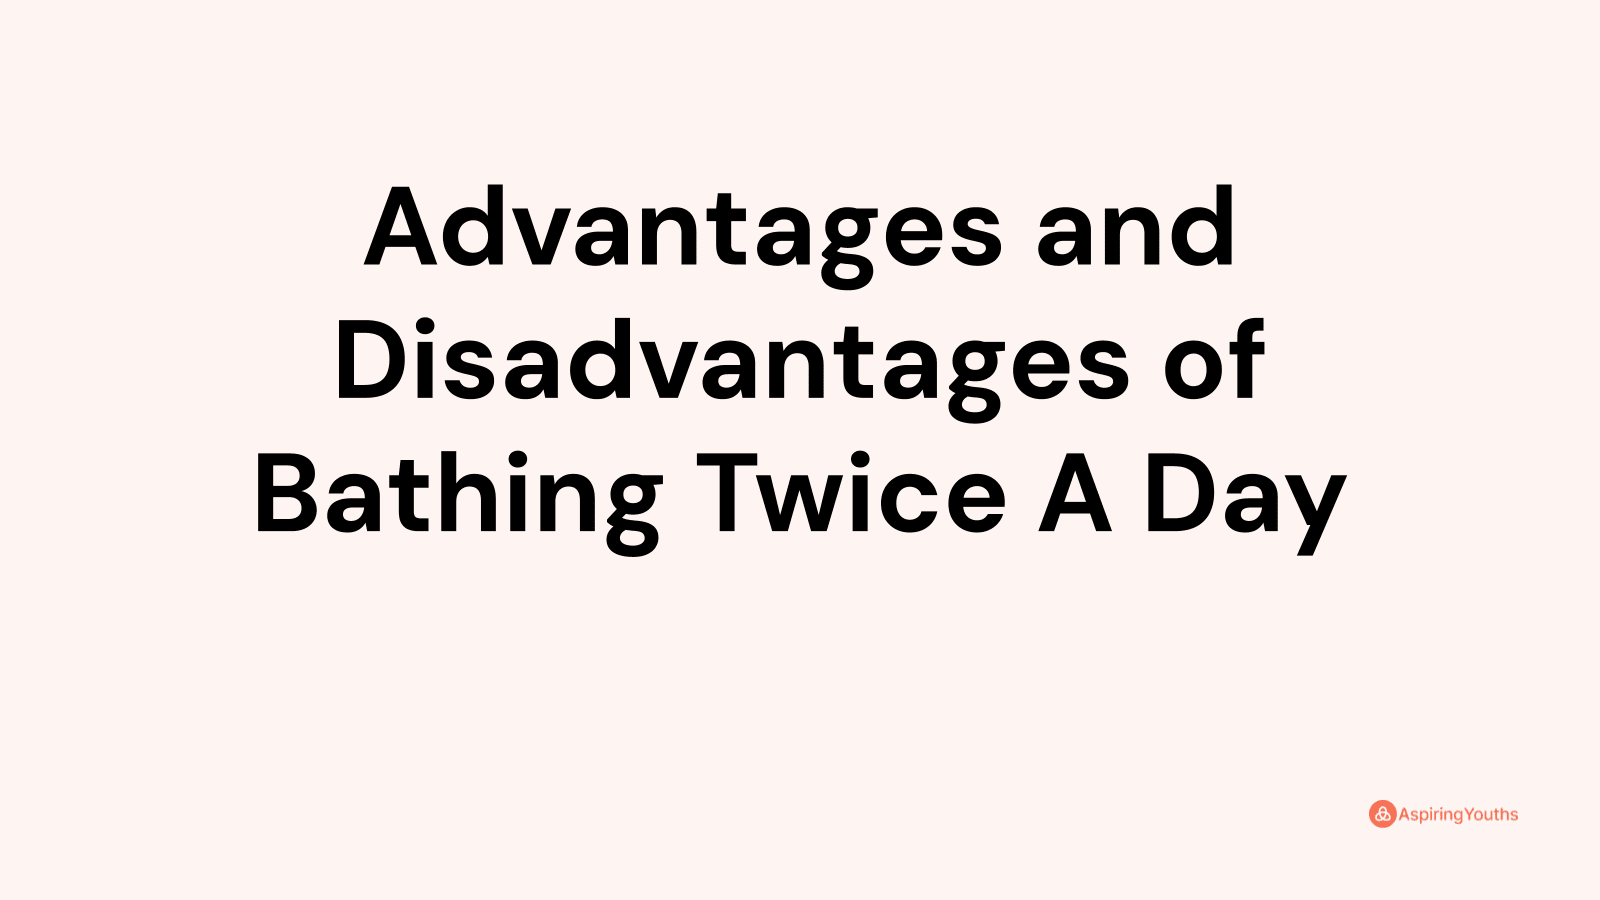 Advantages and disadvantages of Bathing Twice A Day